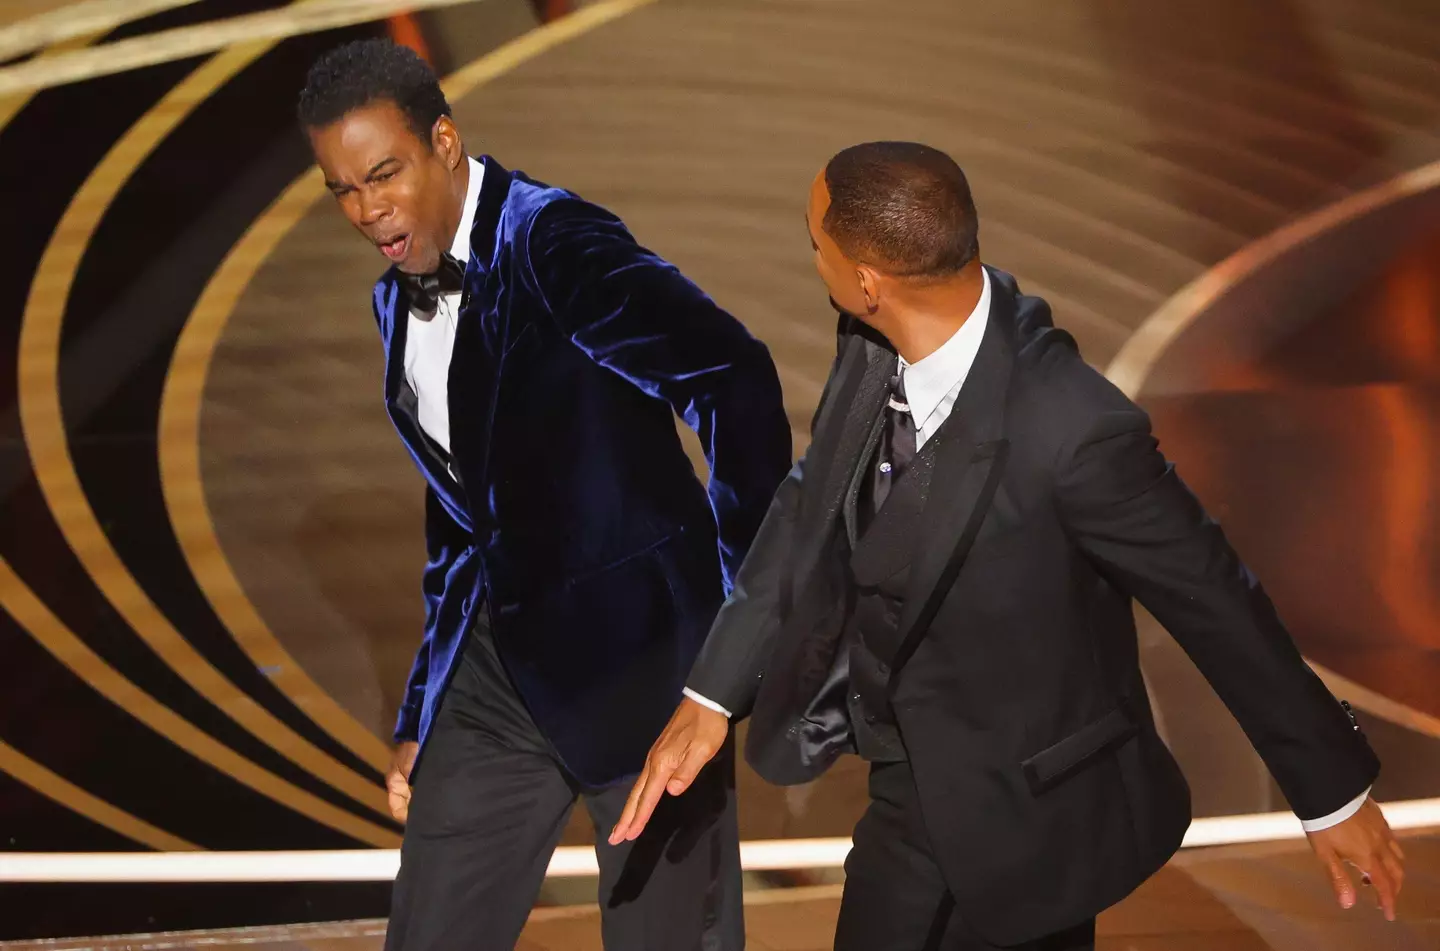 Chris Rock addressed that slap from Will Smith in his show, but also revealed he got his own daughter kicked out of school.